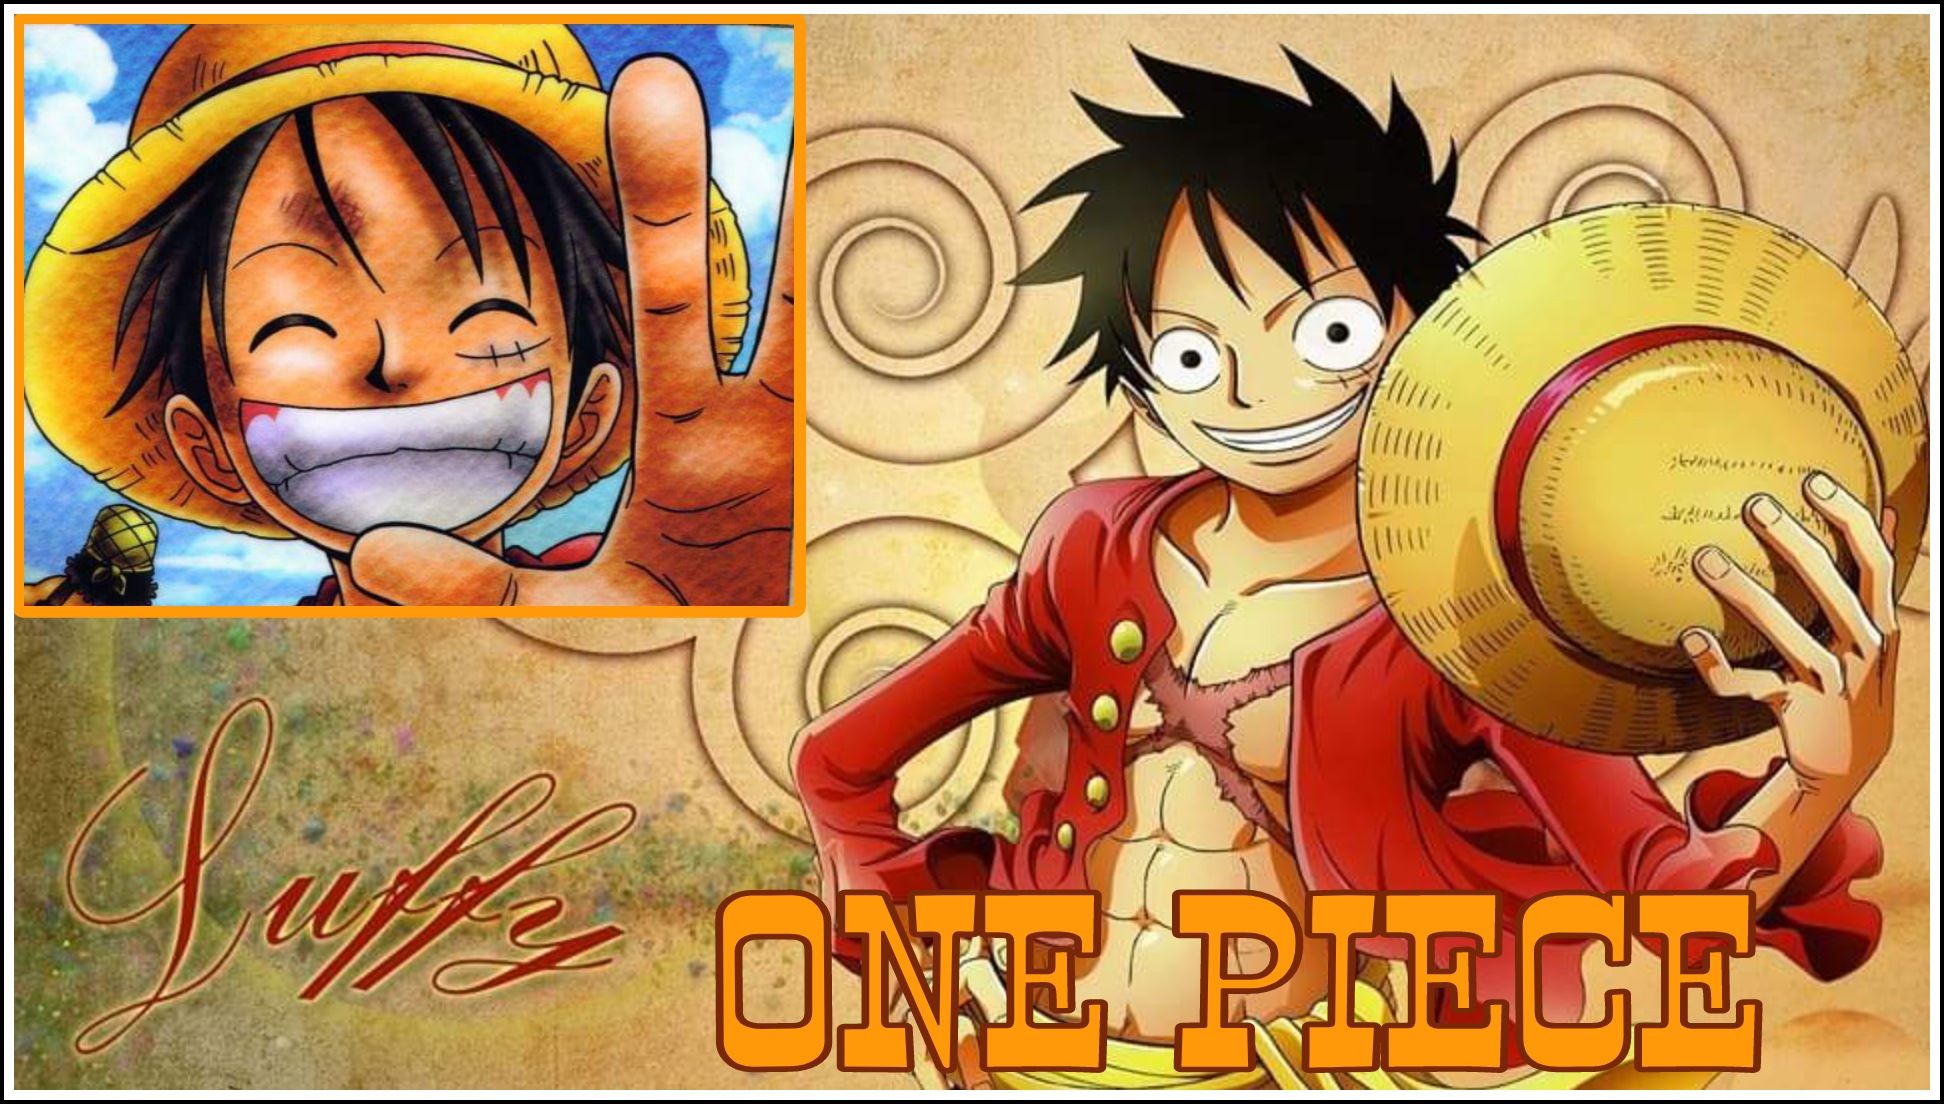 Monkey D Luffy: The Protagonist of One Piece